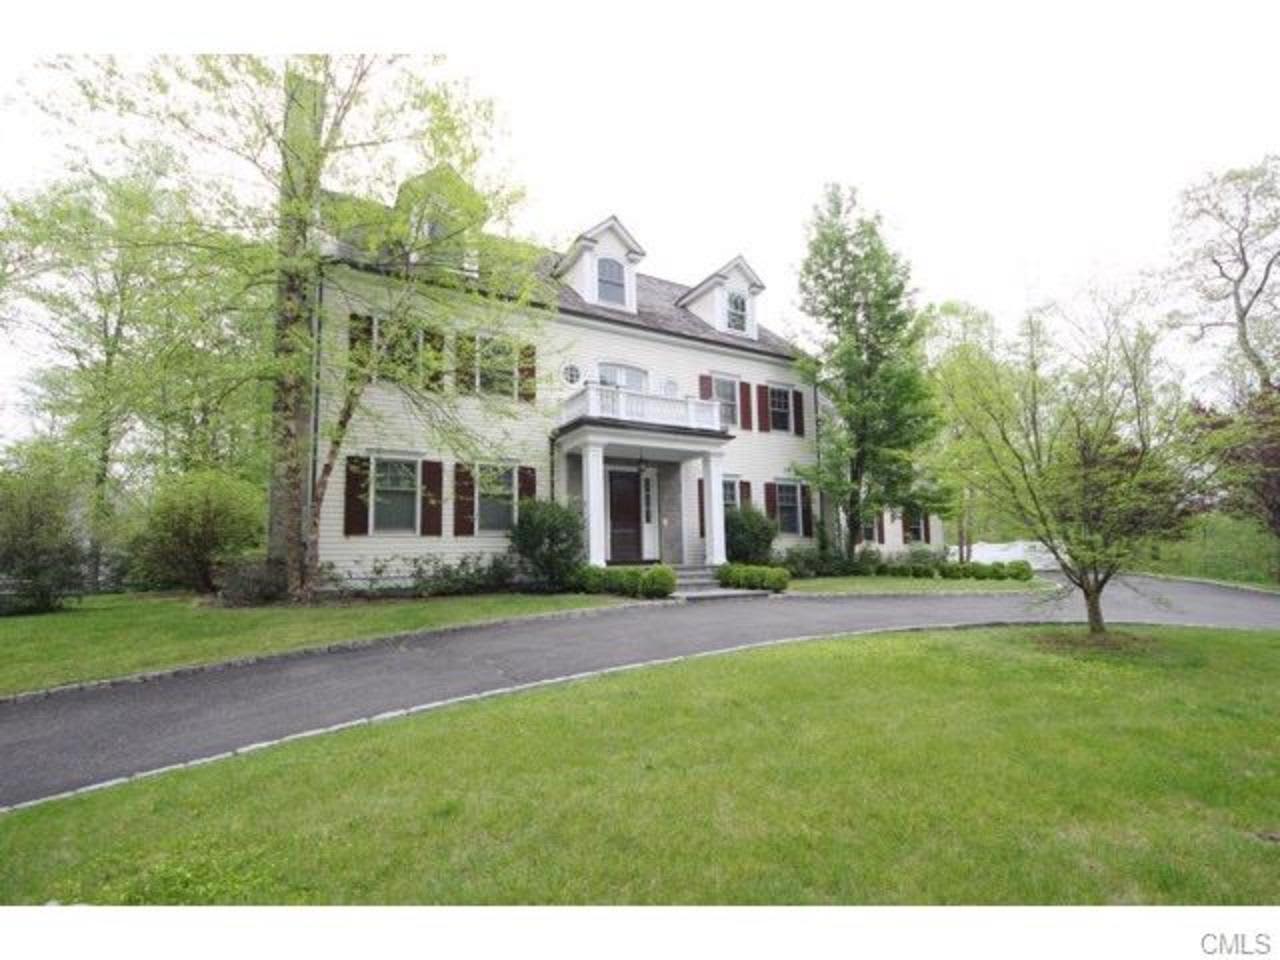 215 Spring Water Lane, New Canaan, CT 06840